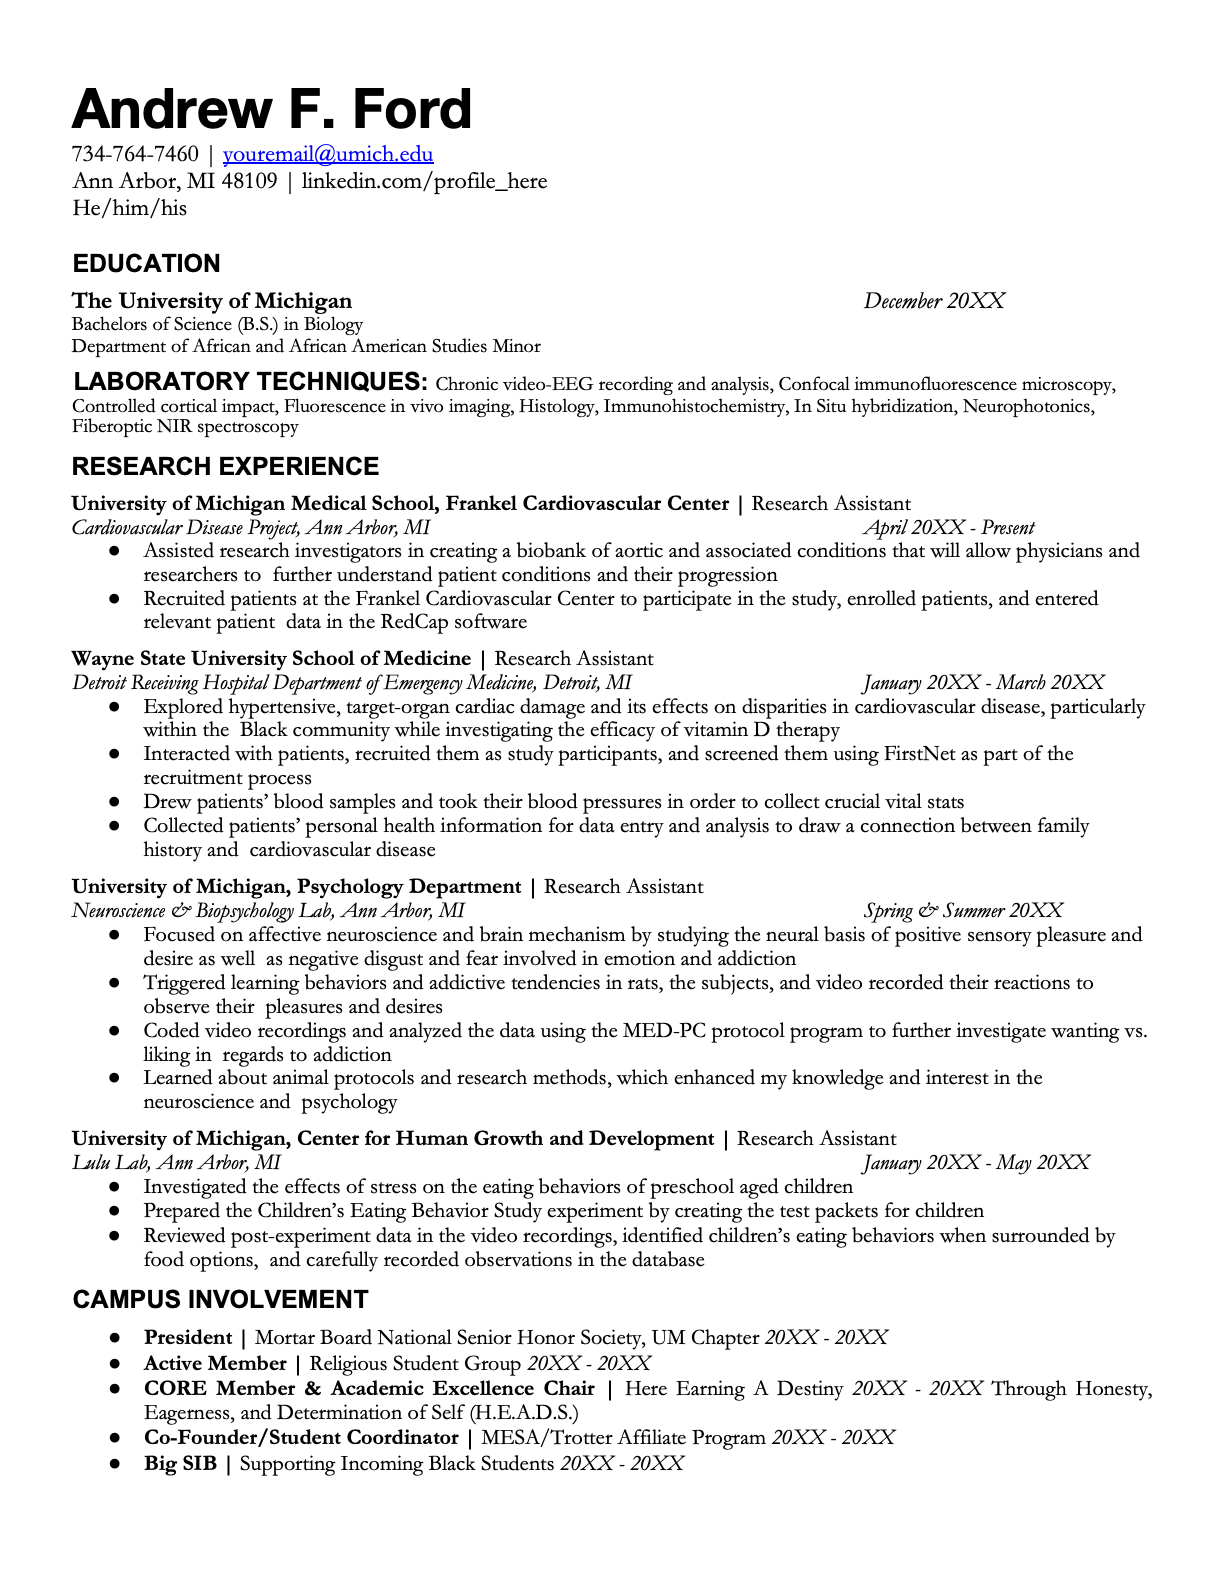 Andrew F. Ford Resume Example